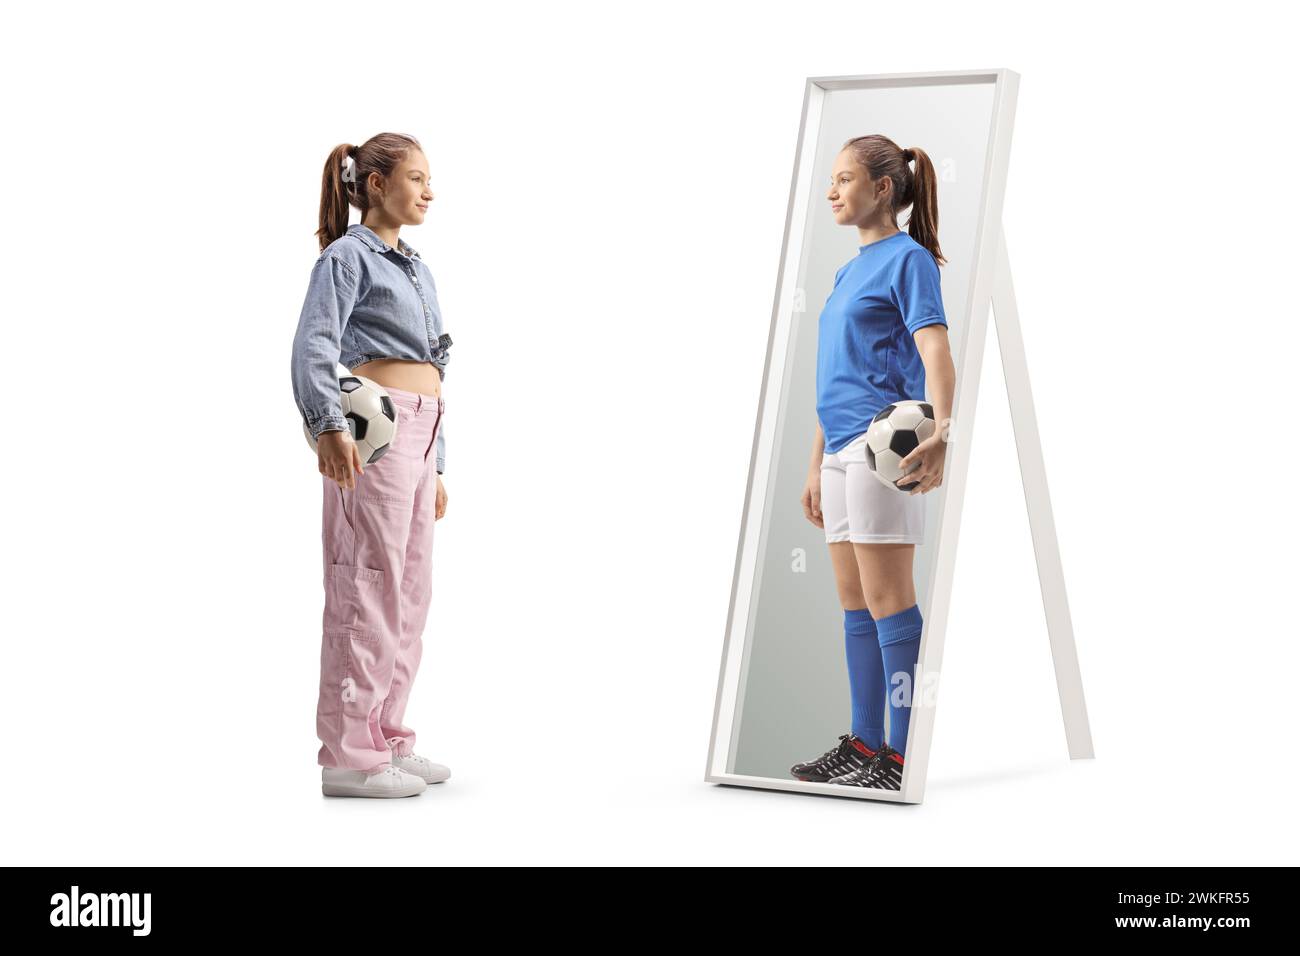 Full length shot of a girl holding a football and looking at a mirror at home Stock Photo